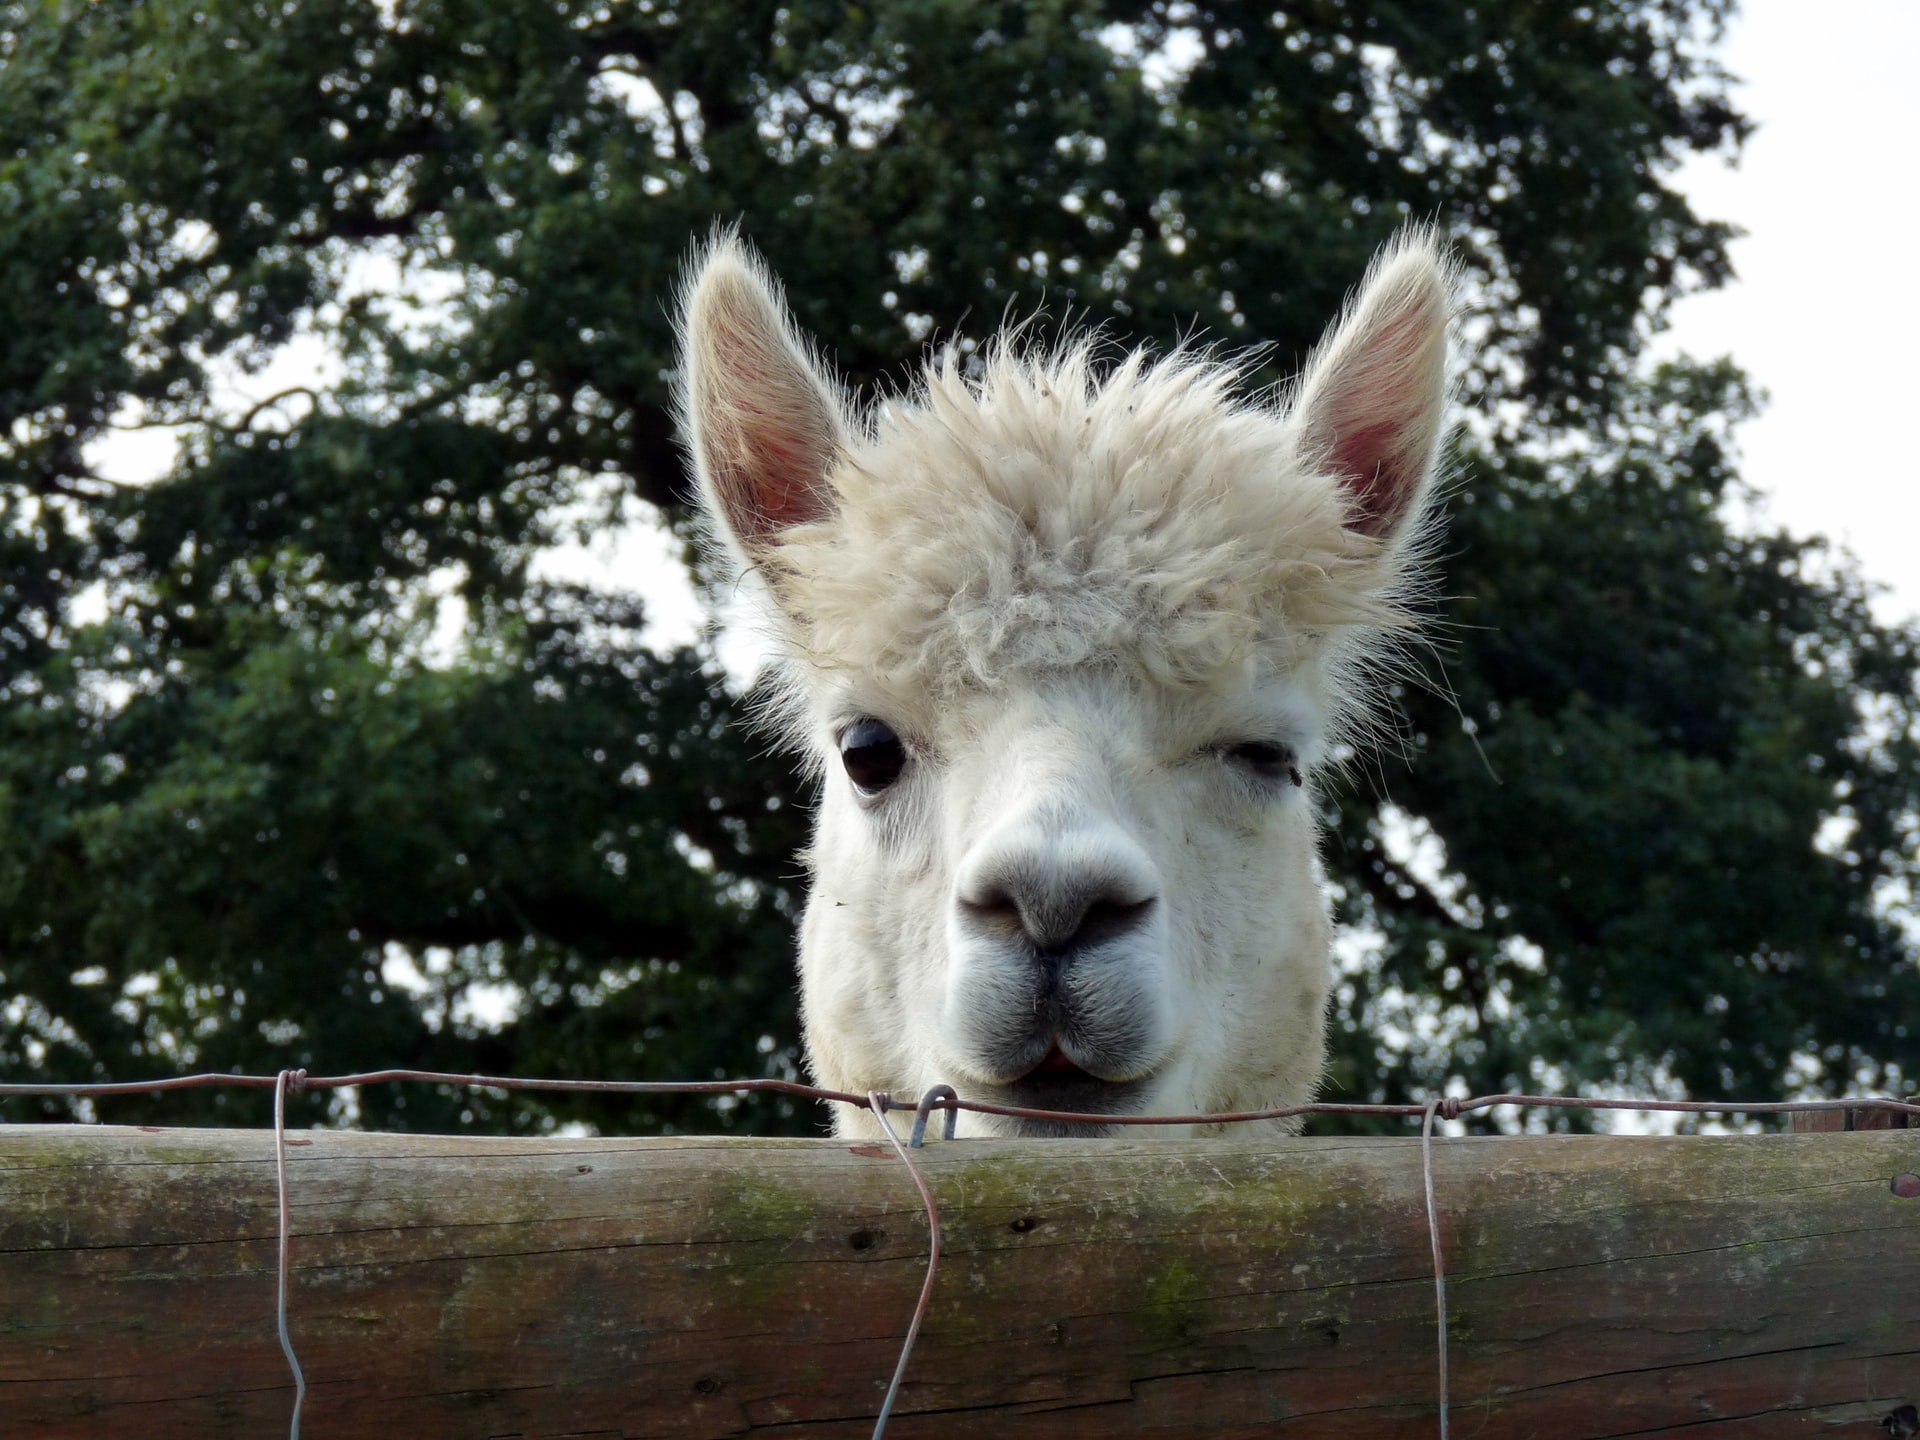 Llama antibodies have a great potential in coronavirus treatment, new research shows